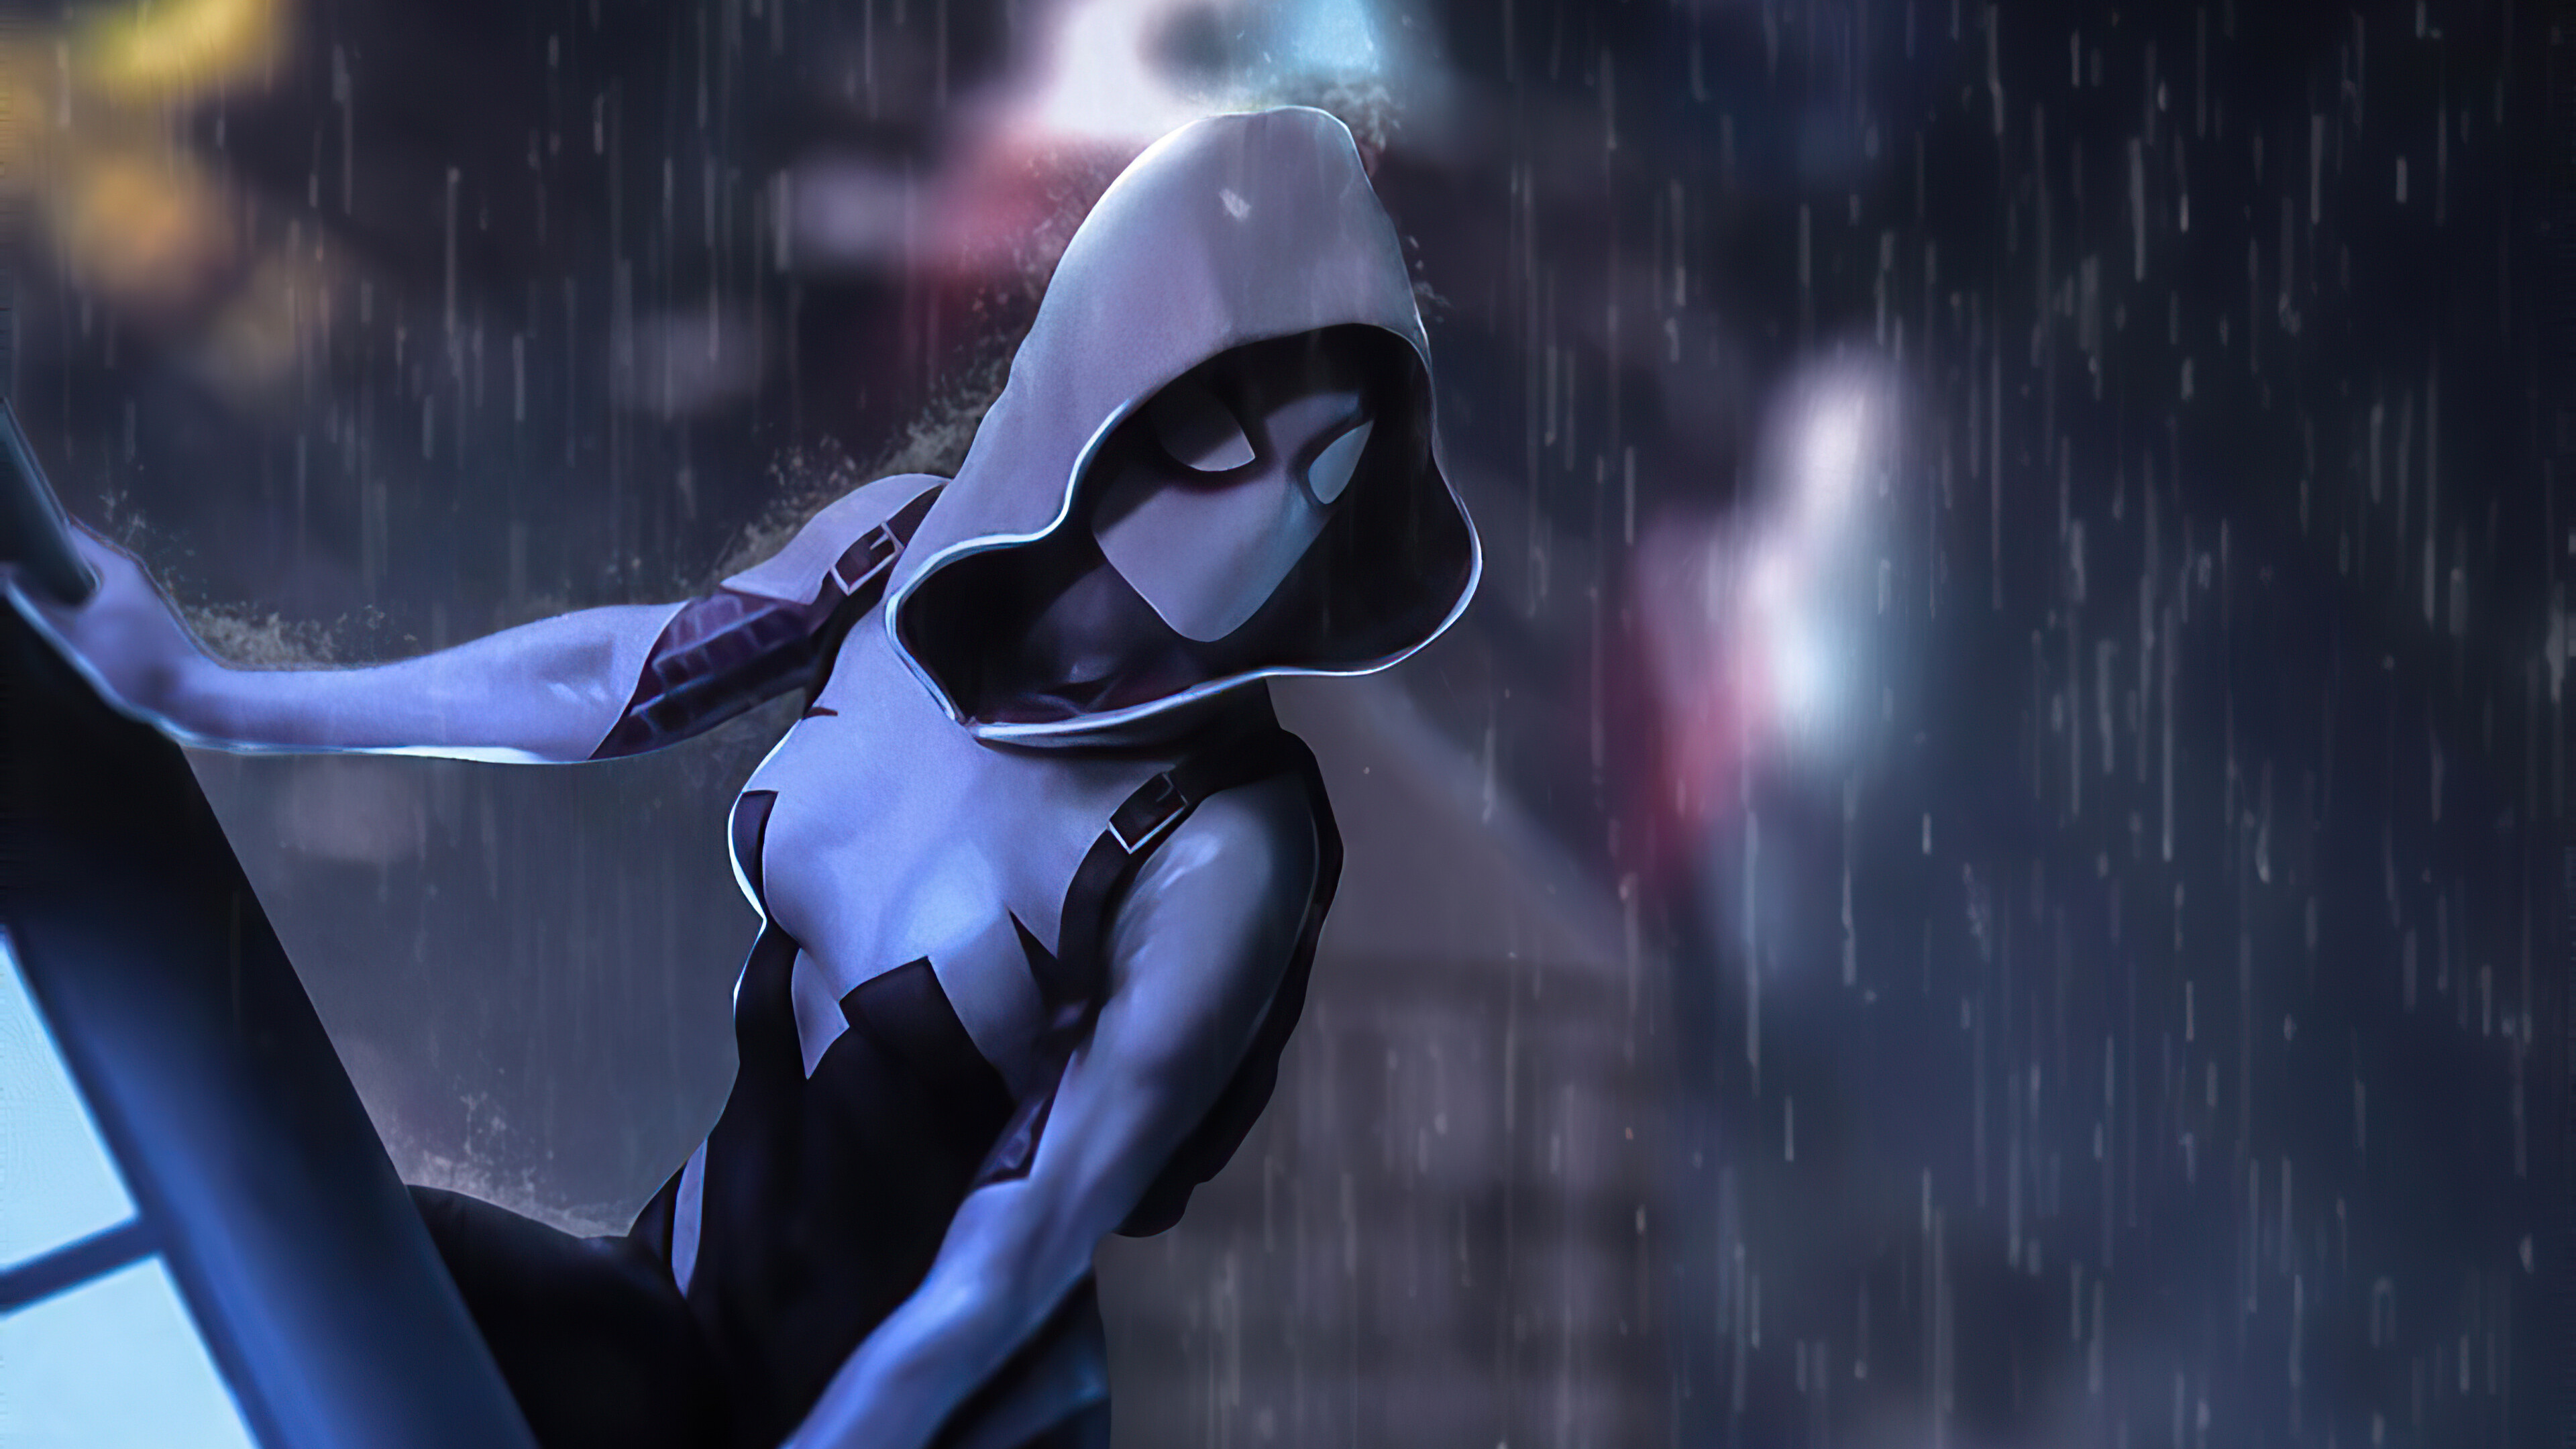 Gwen Stacy: Superheroes, Spider-Woman/Ghost-Spider, a variant of Spider-Man. 3840x2160 4K Wallpaper.